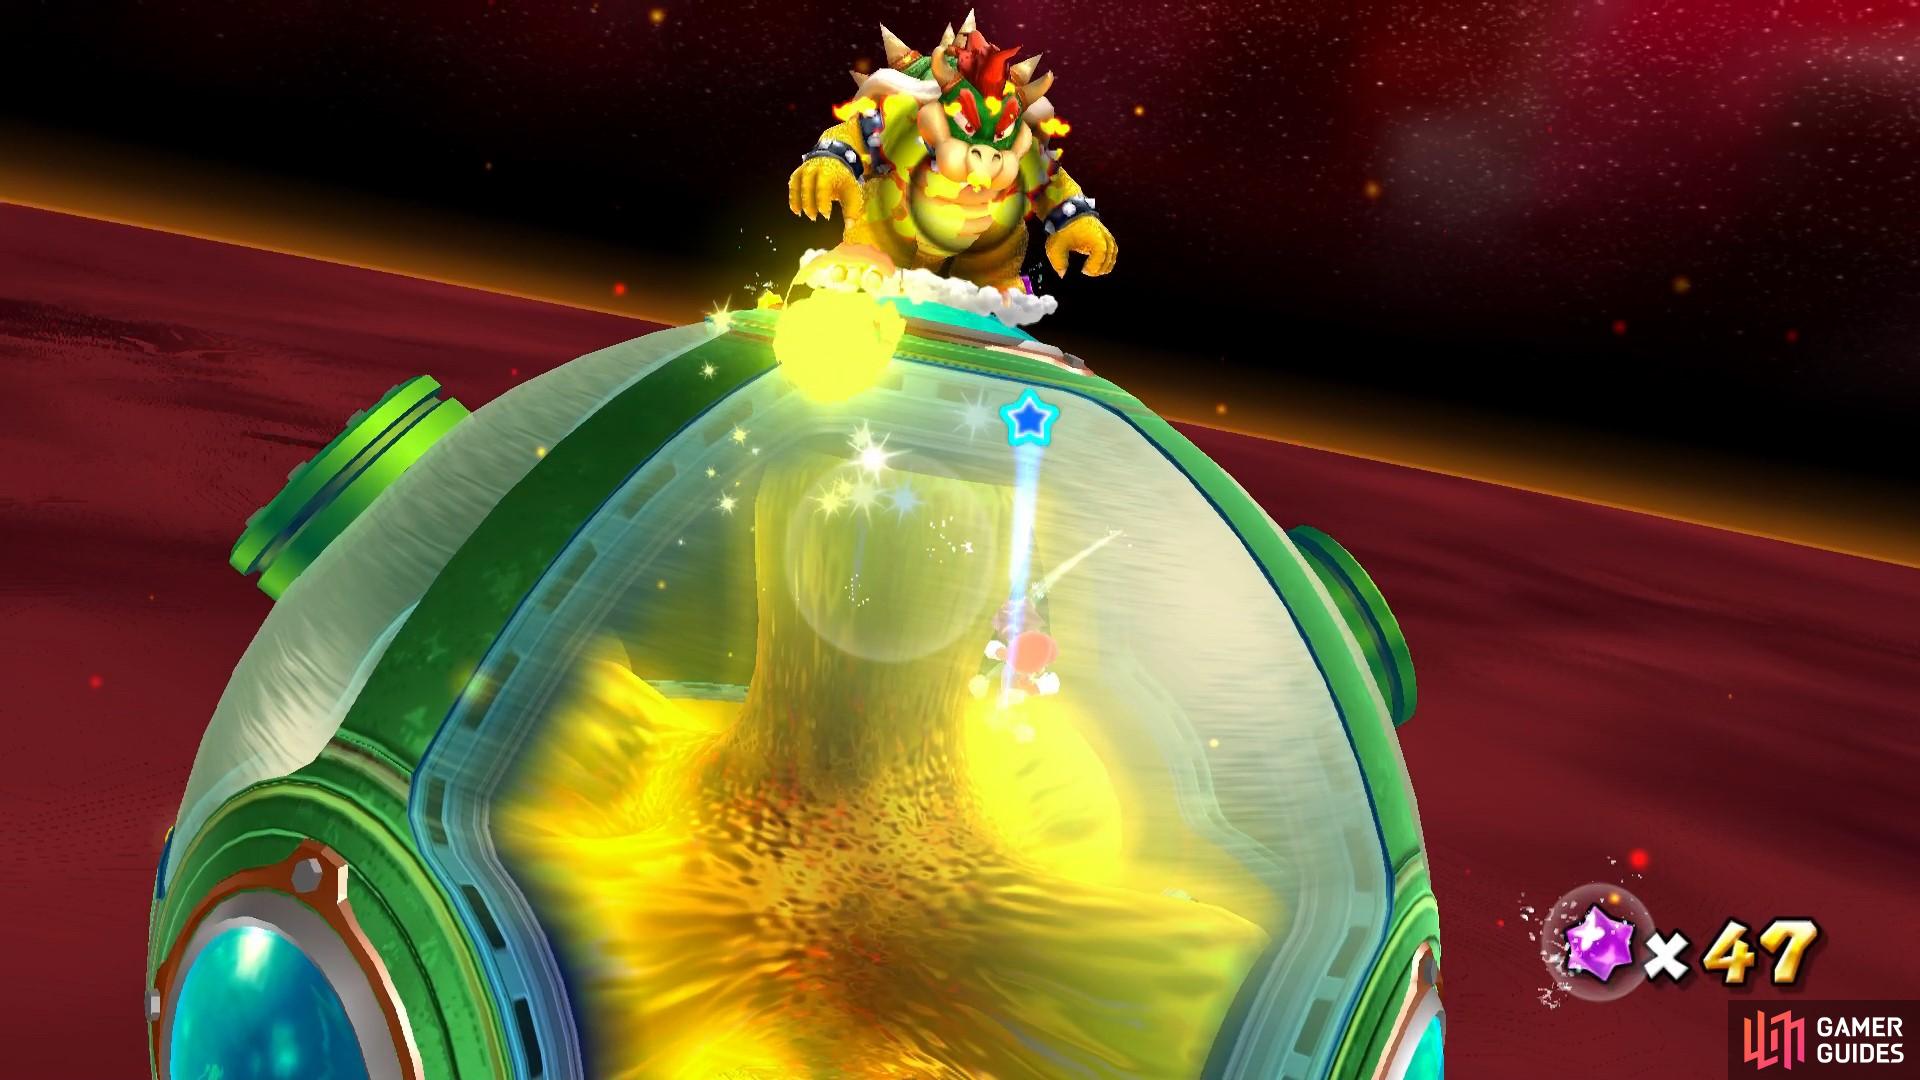 In this image, Bowser is spitting out fire balls